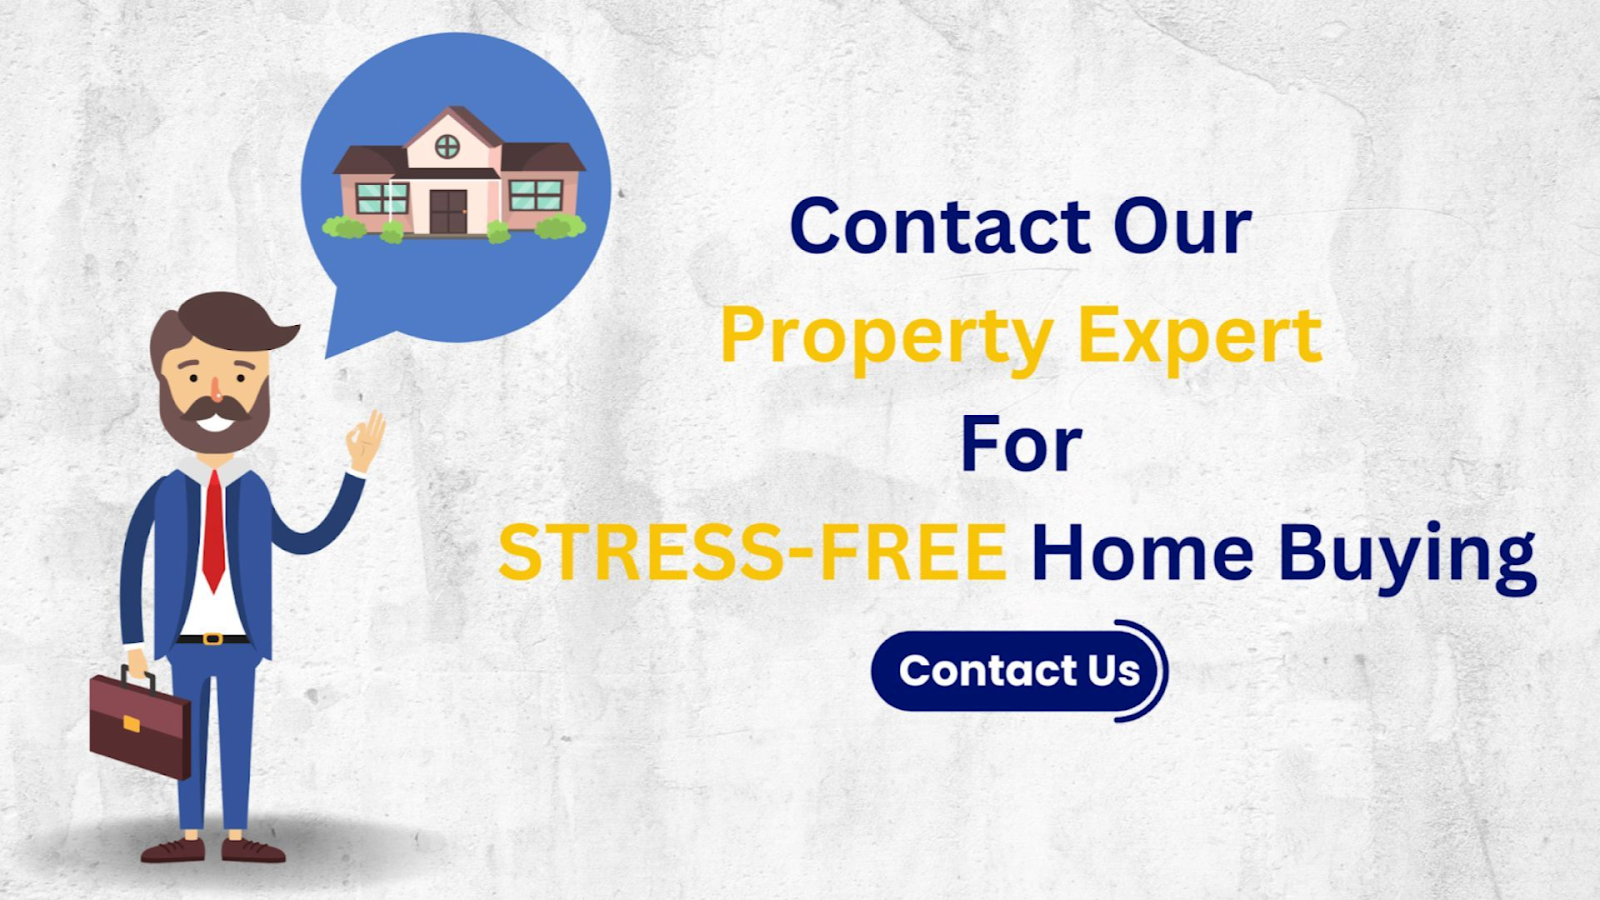 Contact a PropertyCloud real estate specialist for an effortless home purchase.